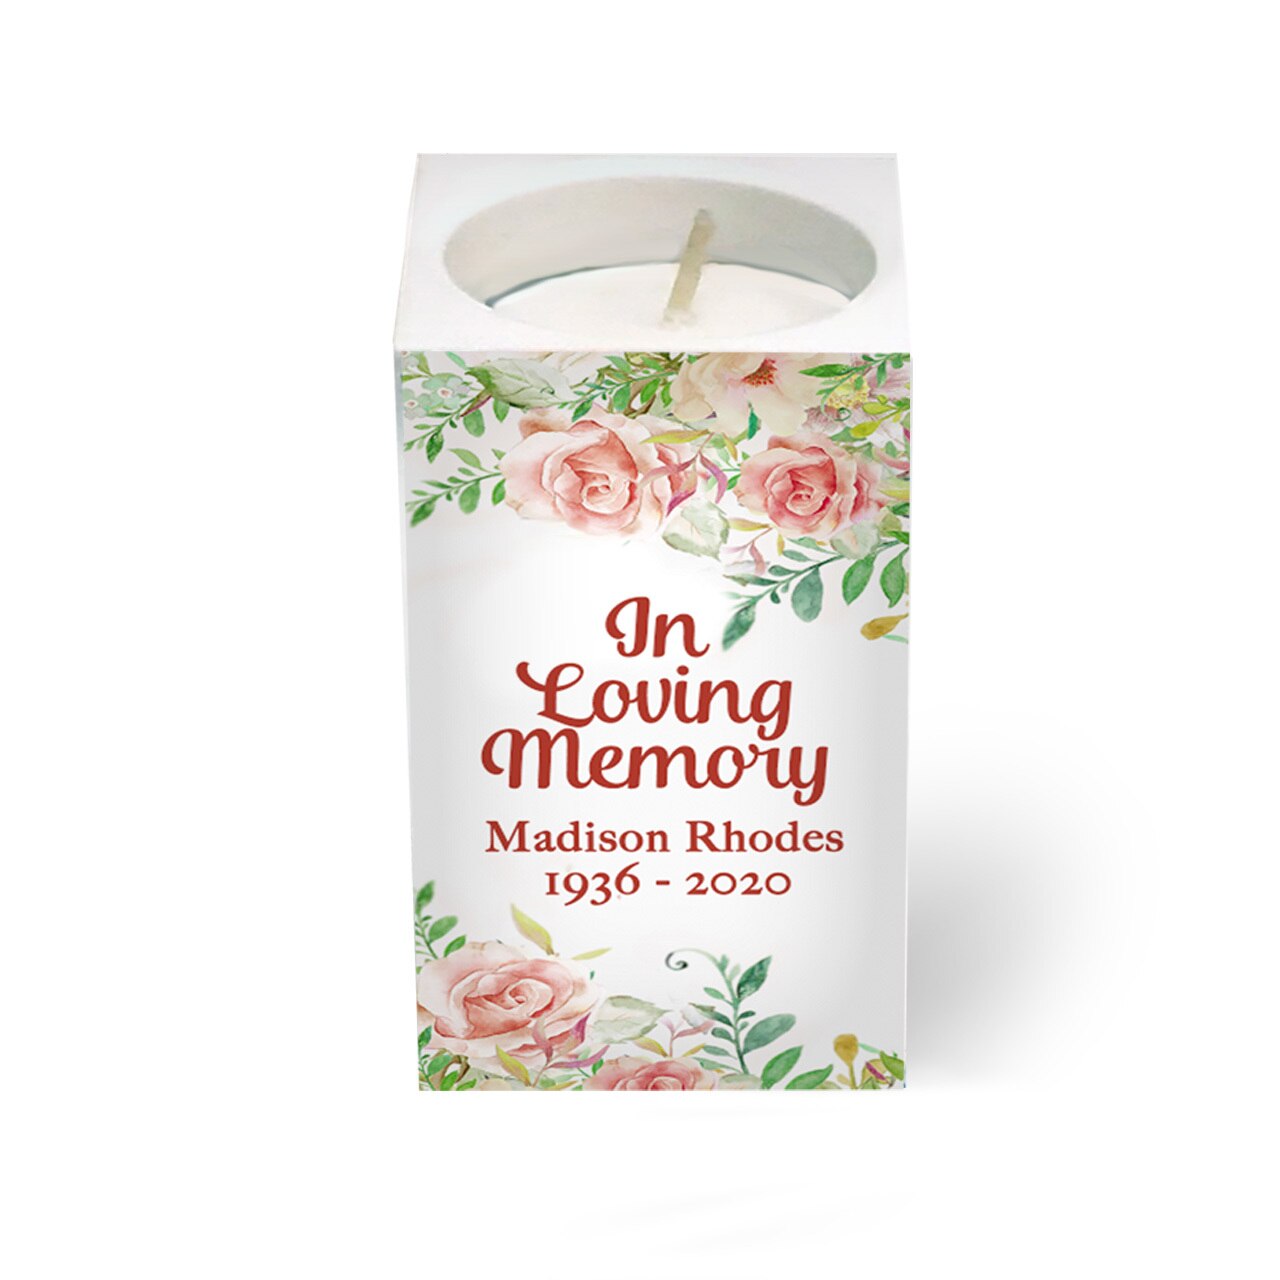 Spring Floral Personalized Mini Memorial Tea Light Candle Holder.